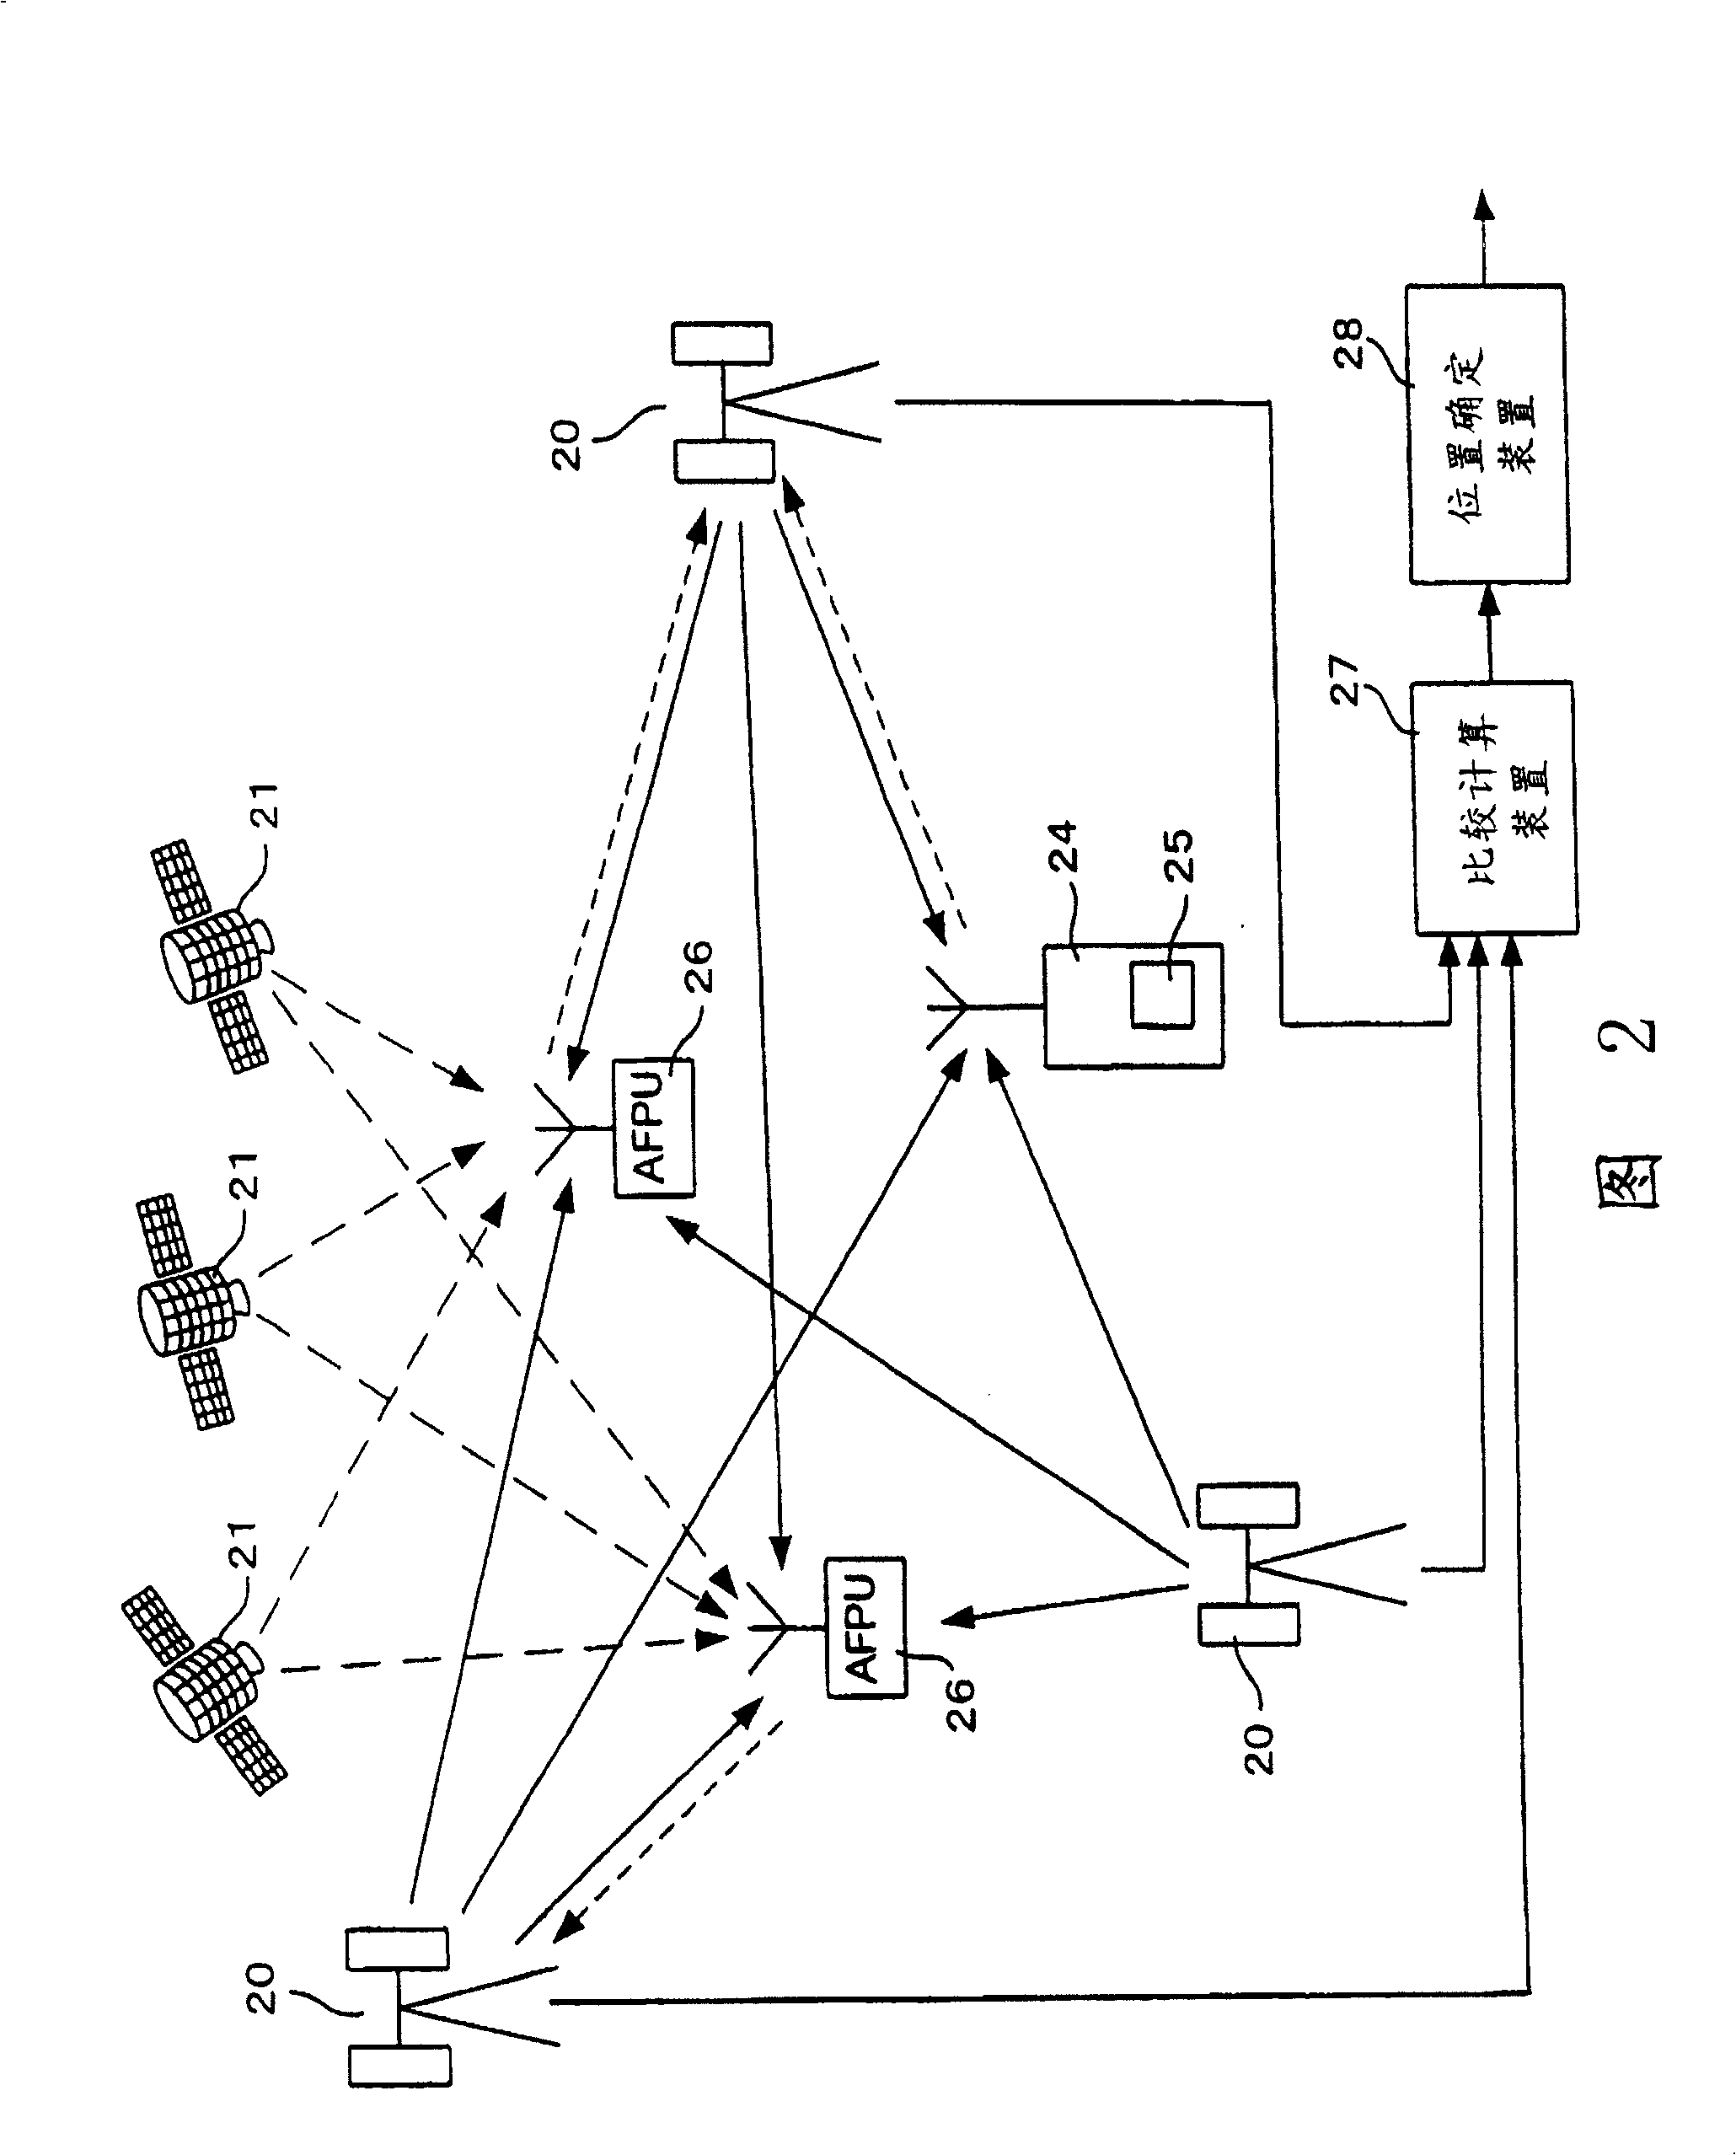 Improved positioning system and cellular communication network